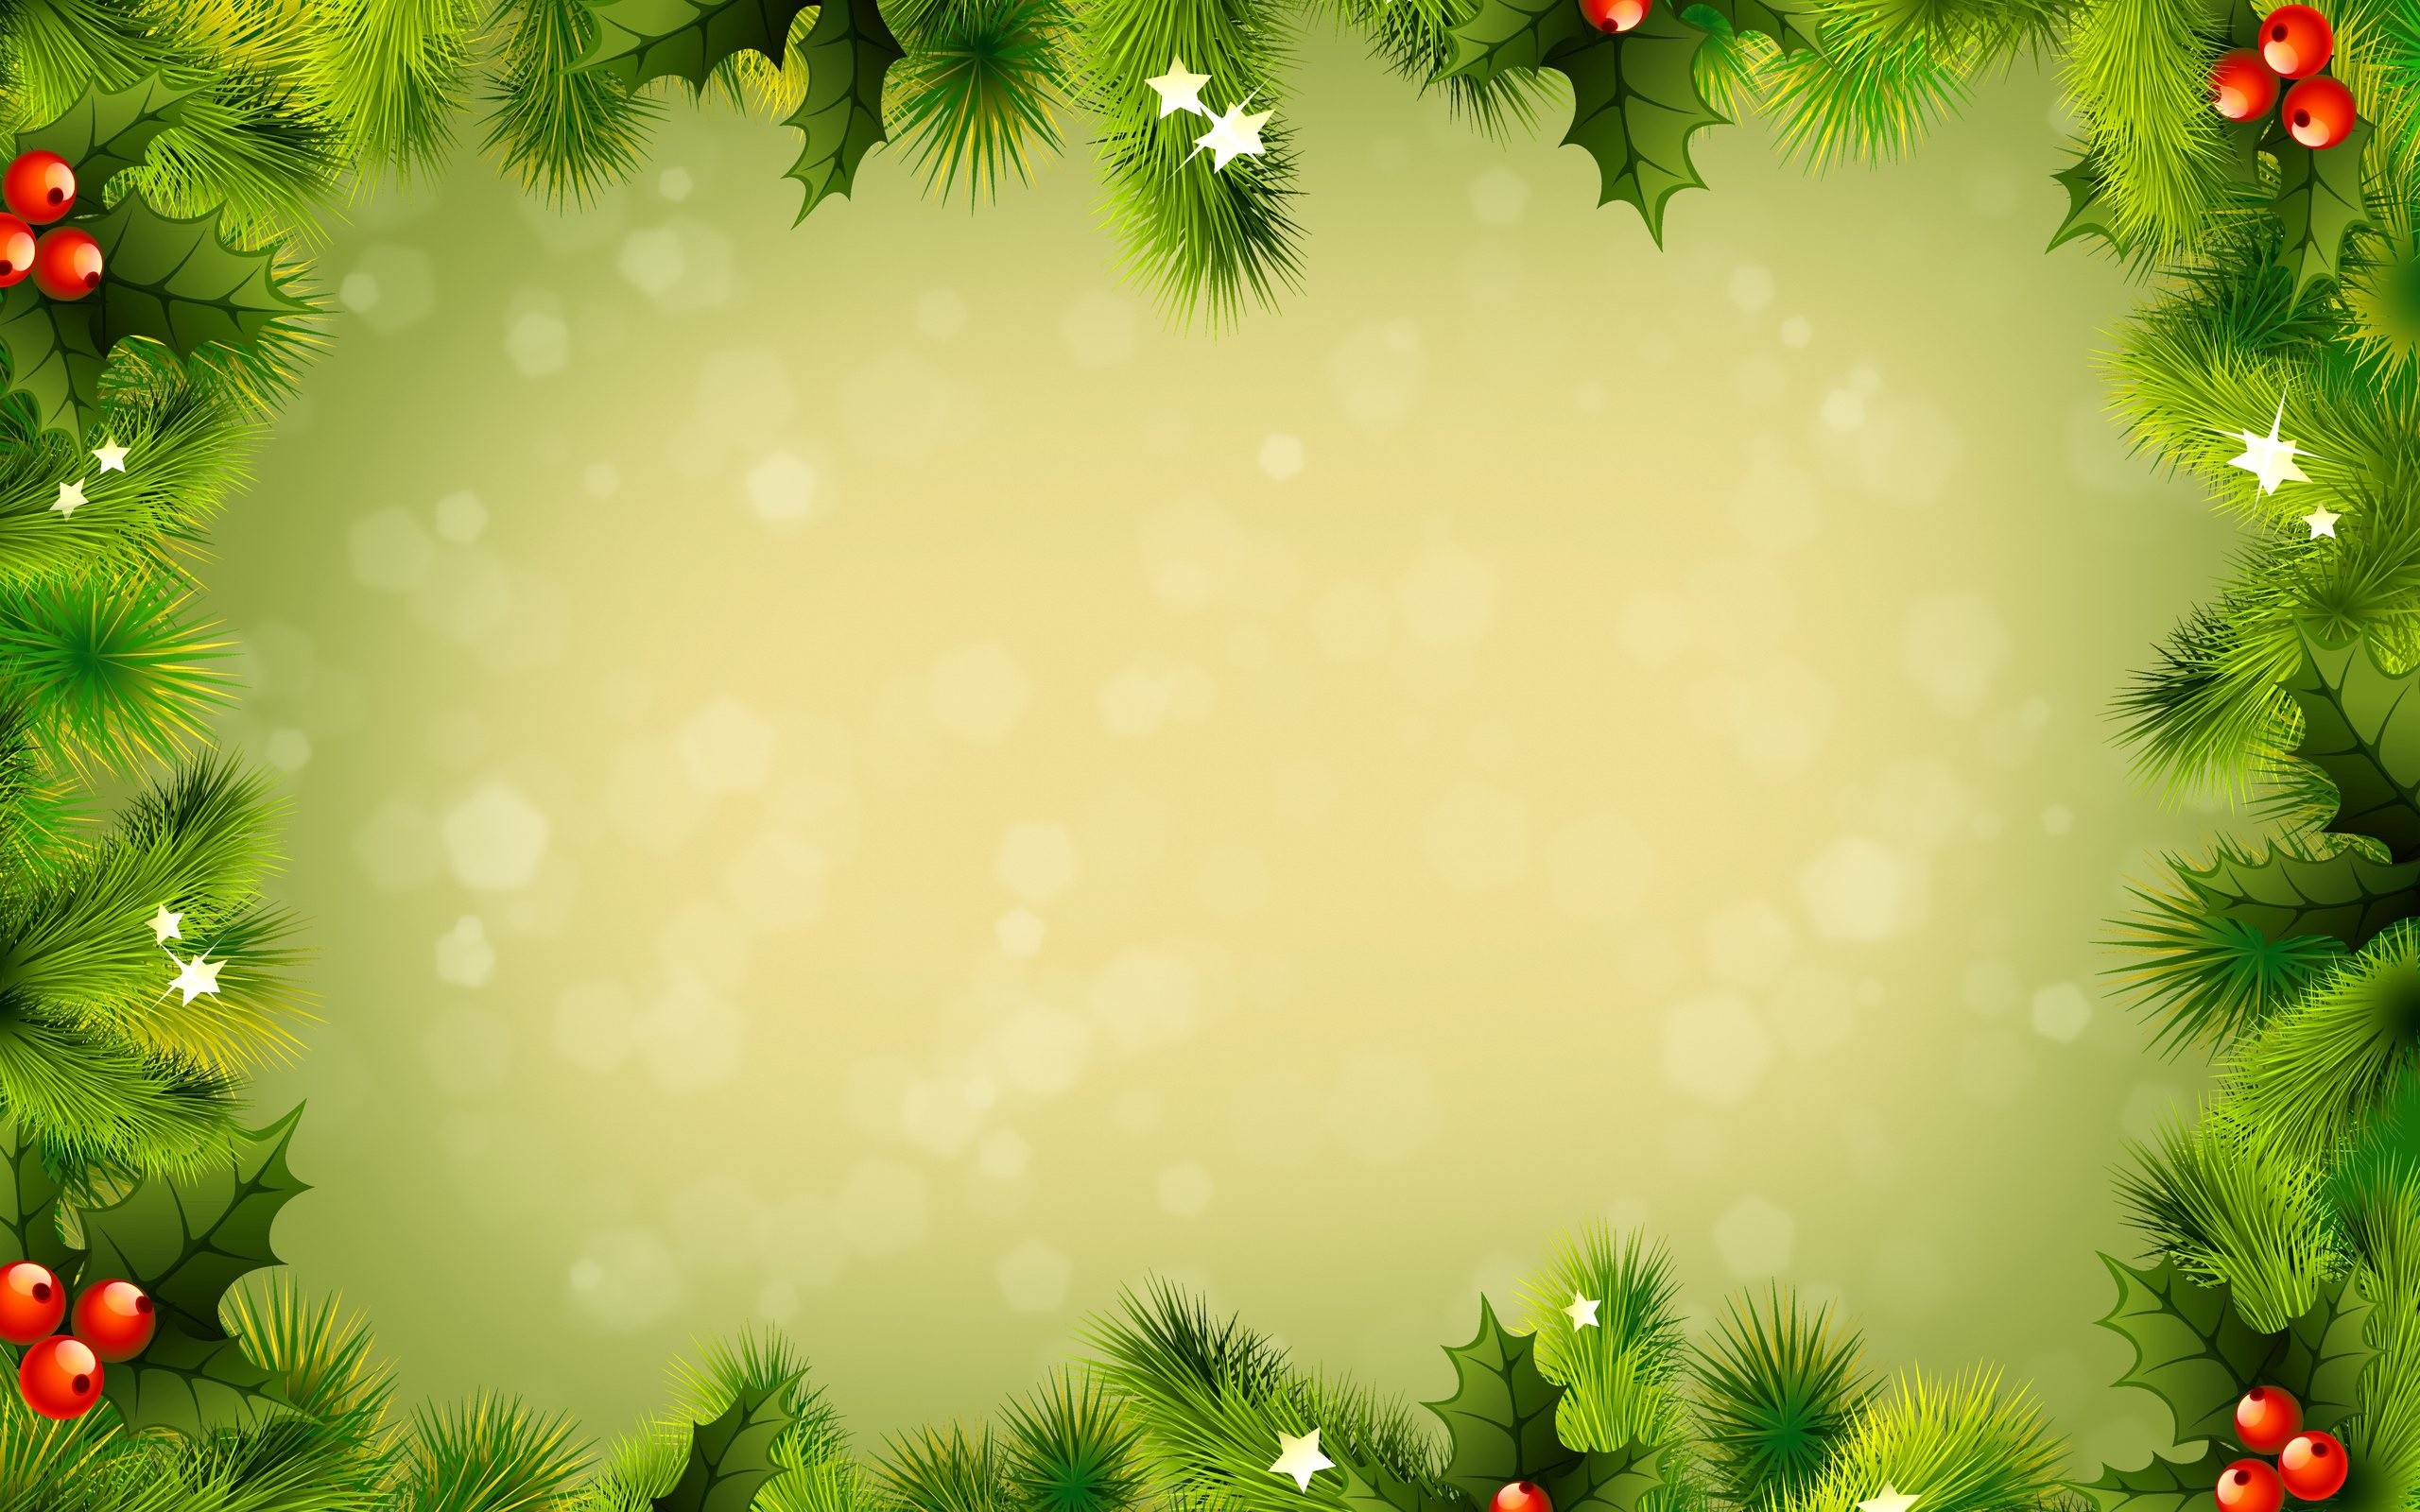 2560x1600 Christmas, Background, High Resolution Images, Free Stock Photos, Desktop  Images For Mac, Amazing, Colorful, Widescreen, Hd, Artwork, 2560Ã1600  Wallpaper HD